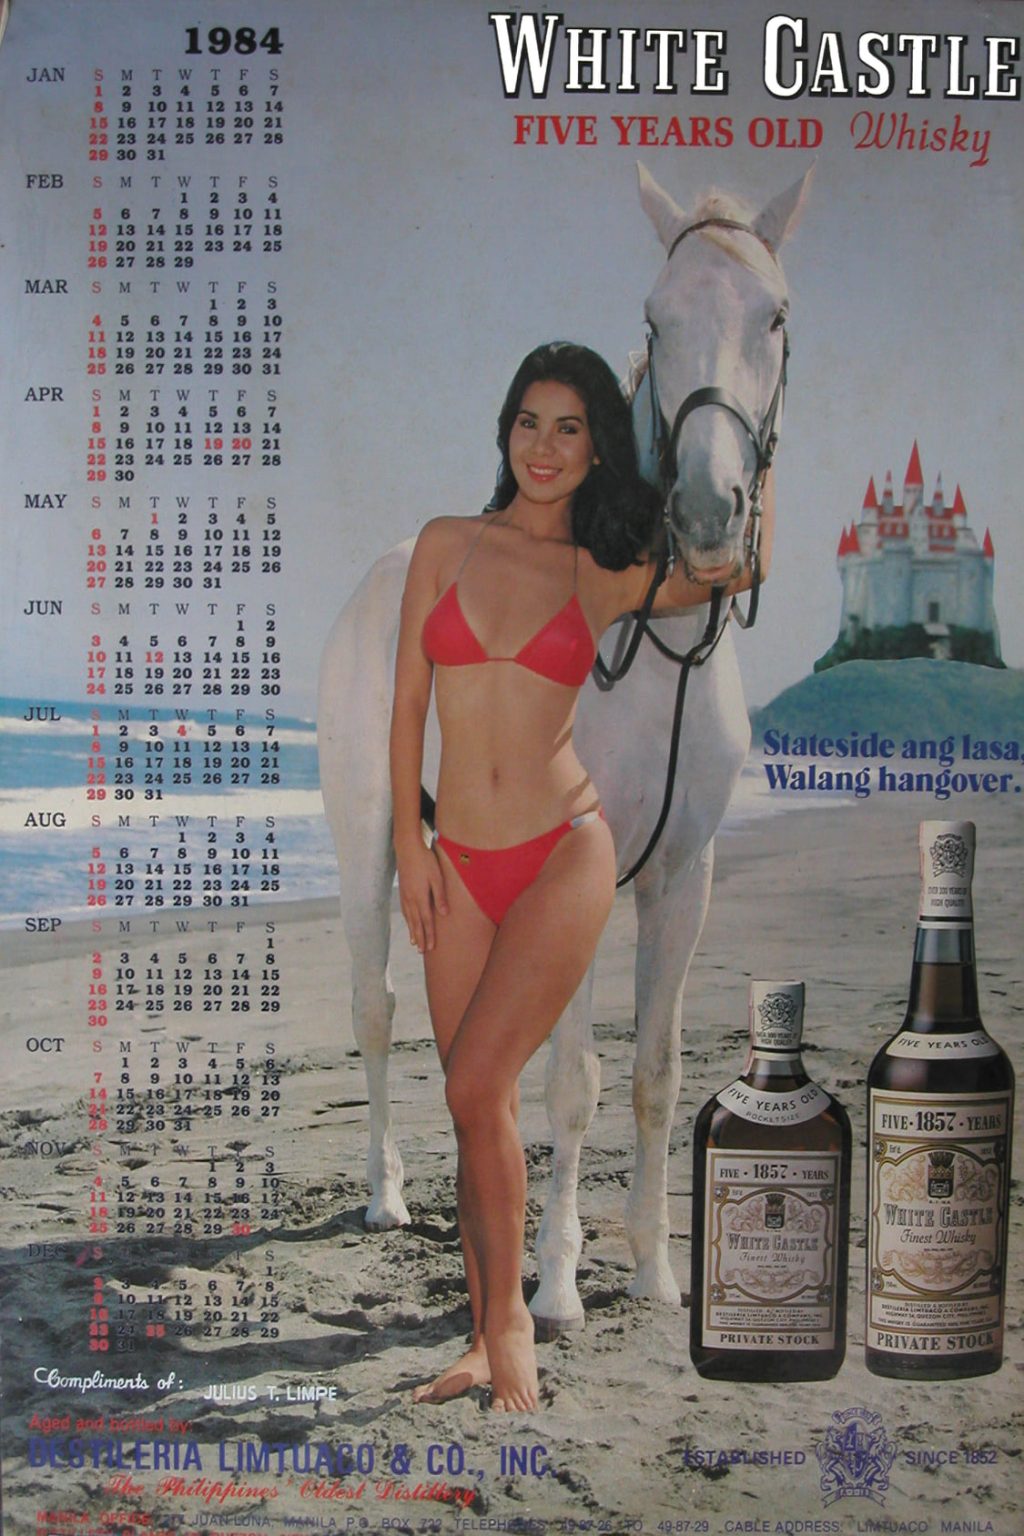 White Castle Whiskey Trends with 2021 Calendar Featuring a Guy for the